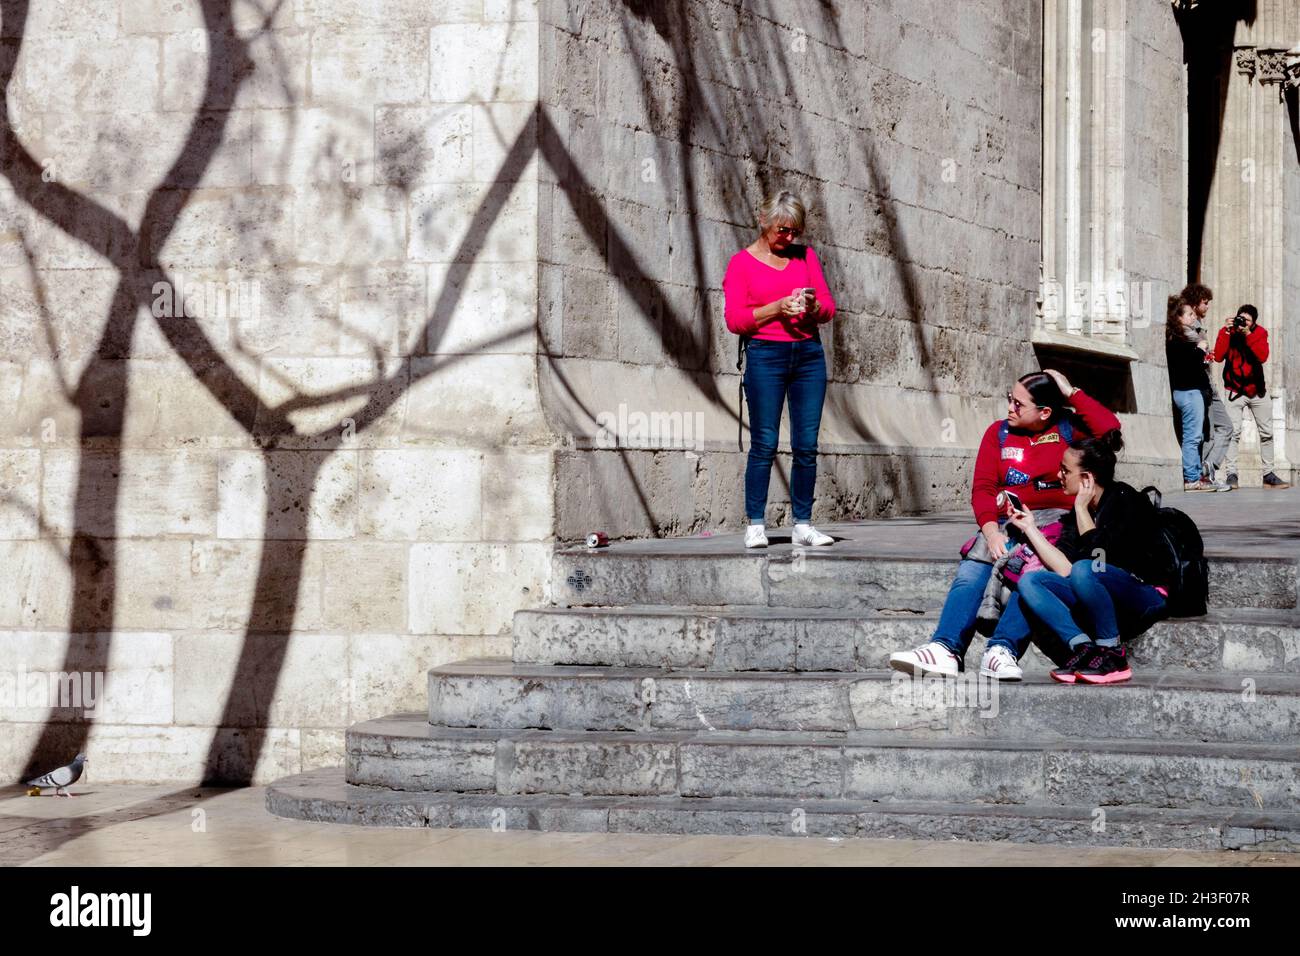 Tourists sit on the steps at Calle de la Lonja Valencia Old Town Spain tree shadows on the wall Stock Photo